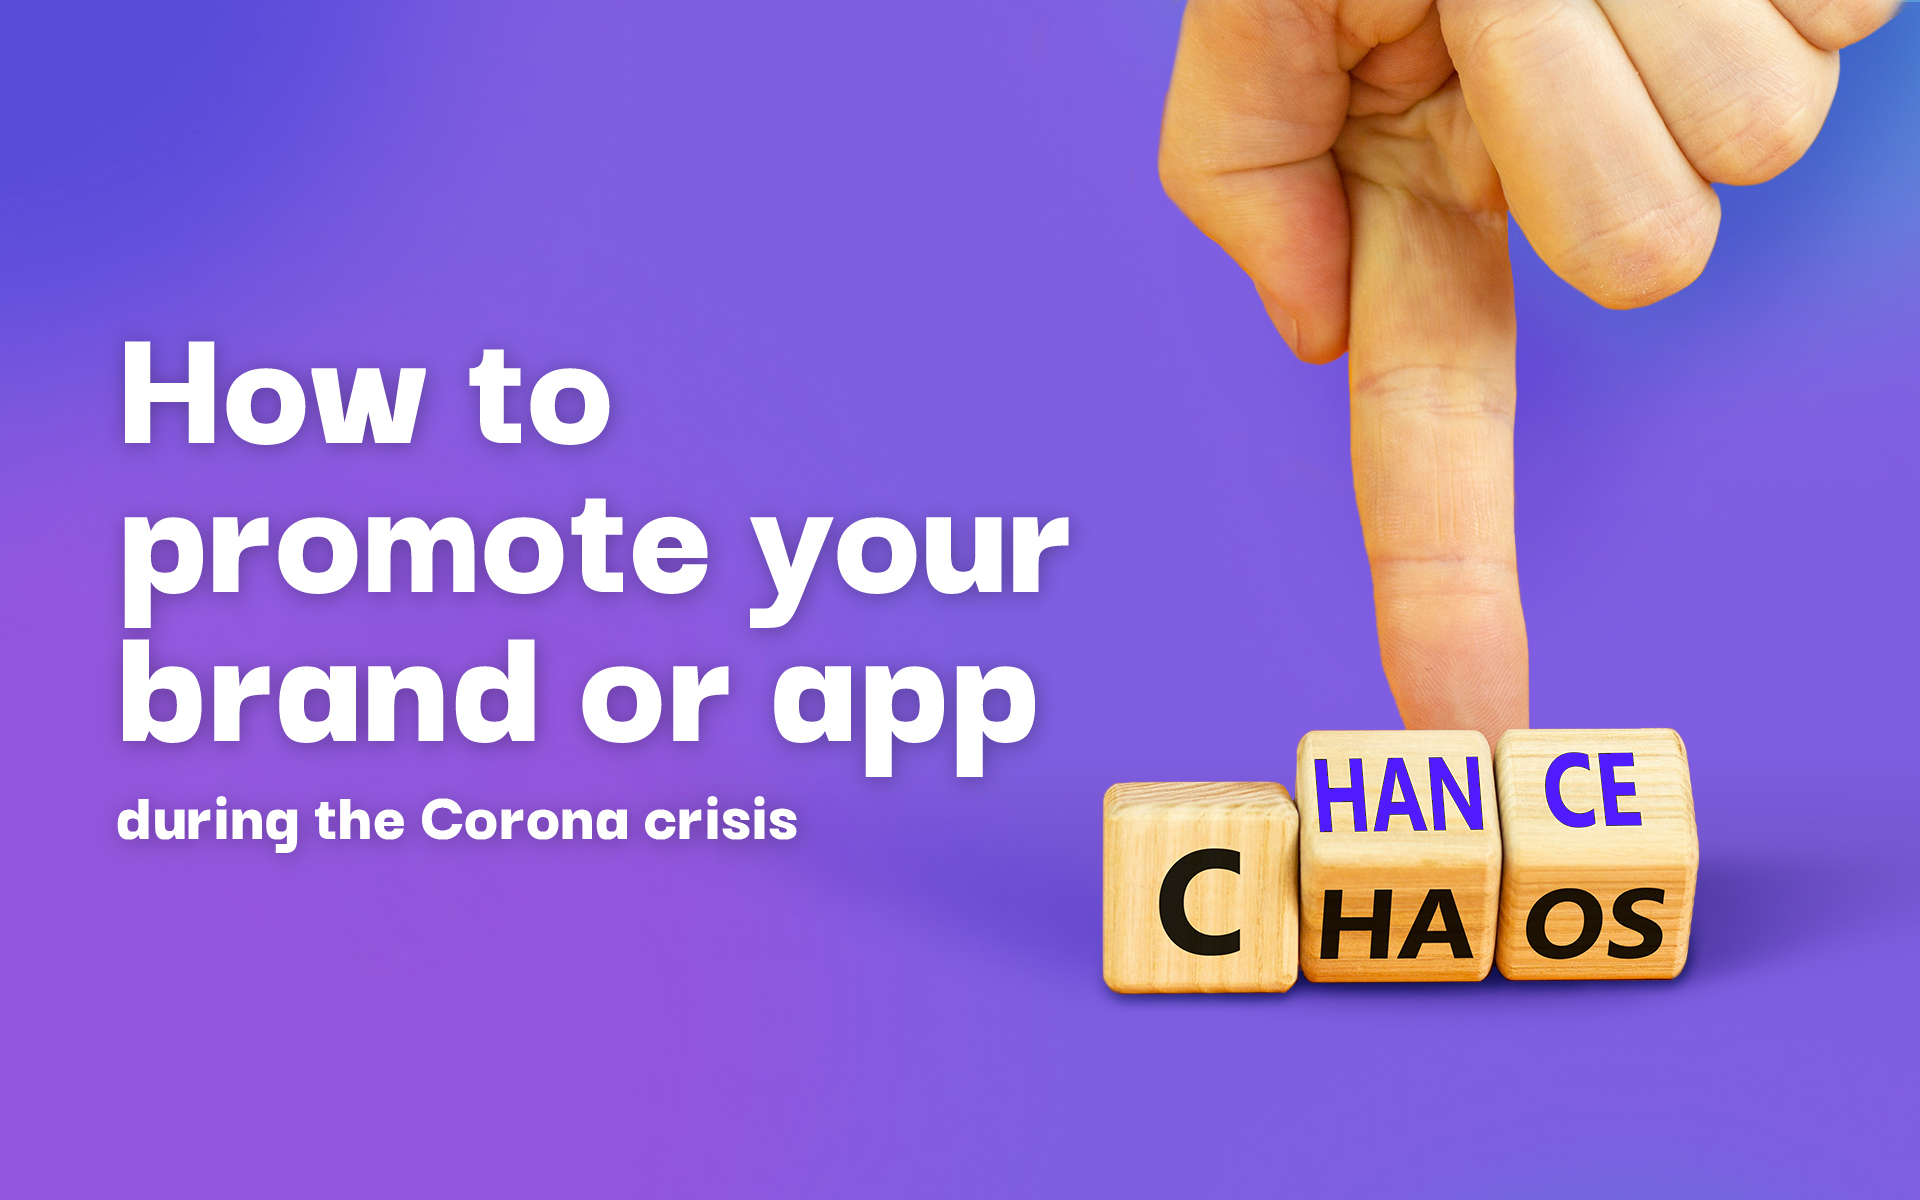 How to promote your brand or app during the Corona crisis